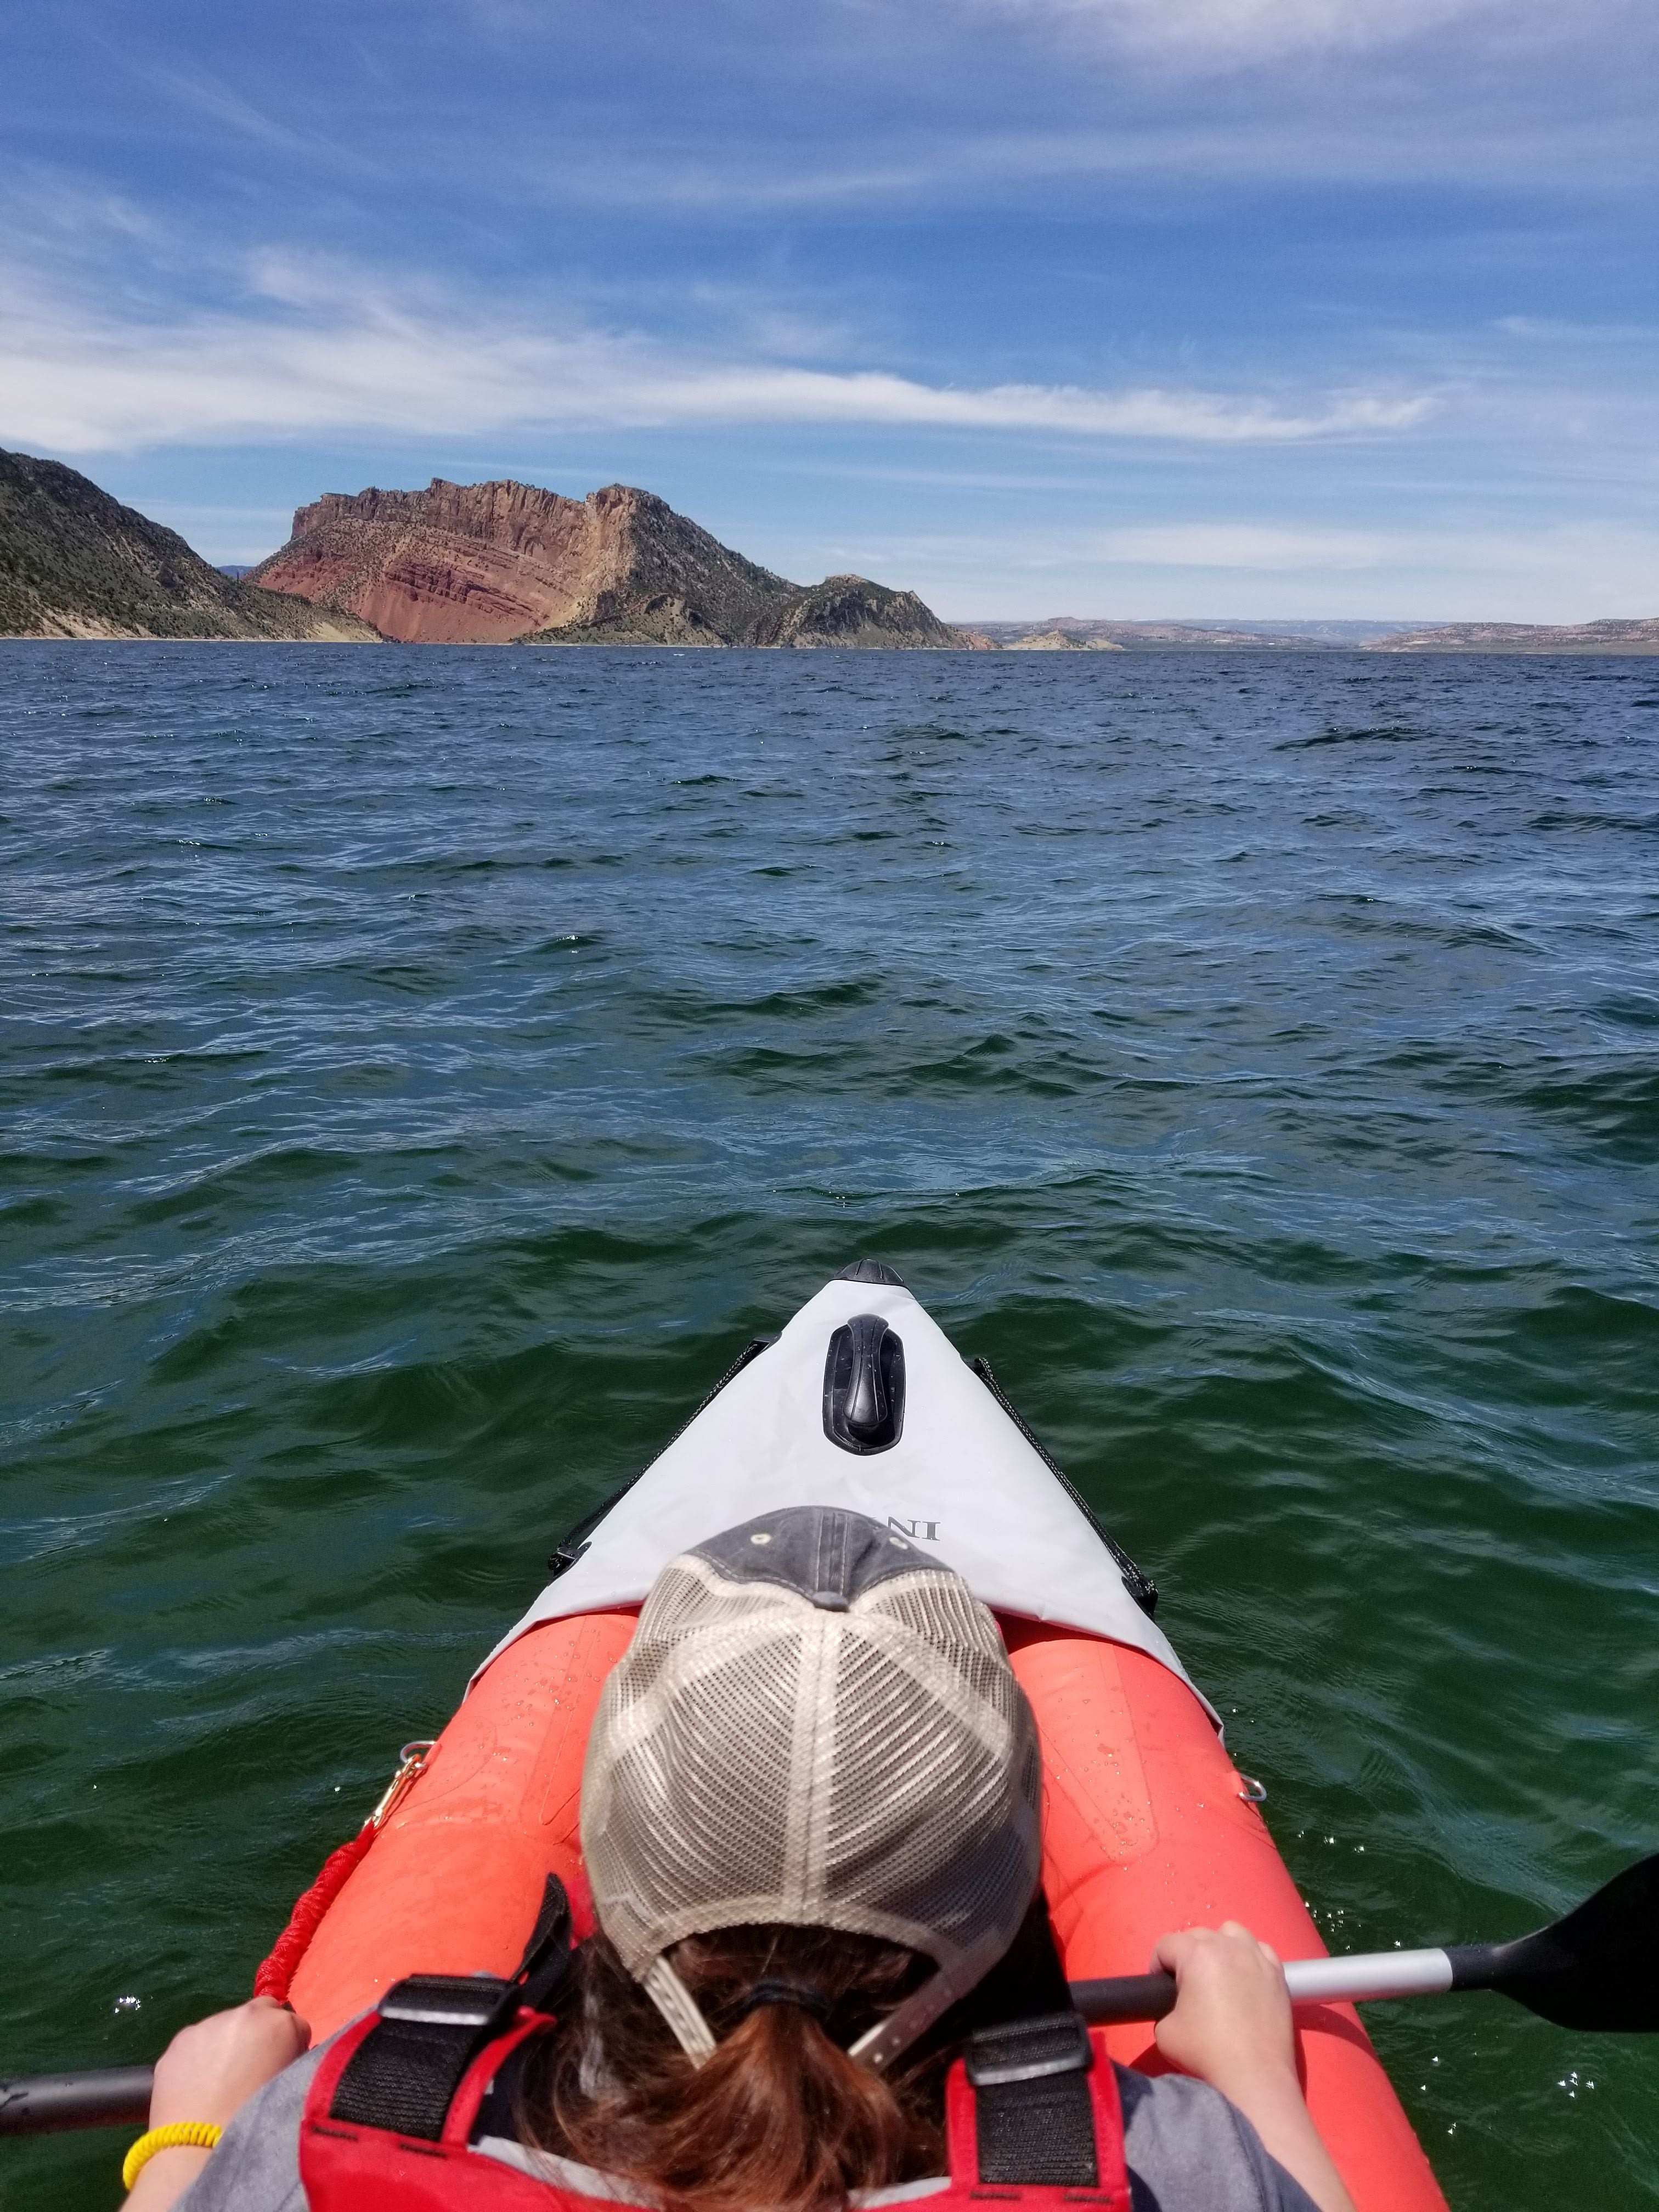 Taken just after launching our kayak from the Antelope Flat boat ramp.